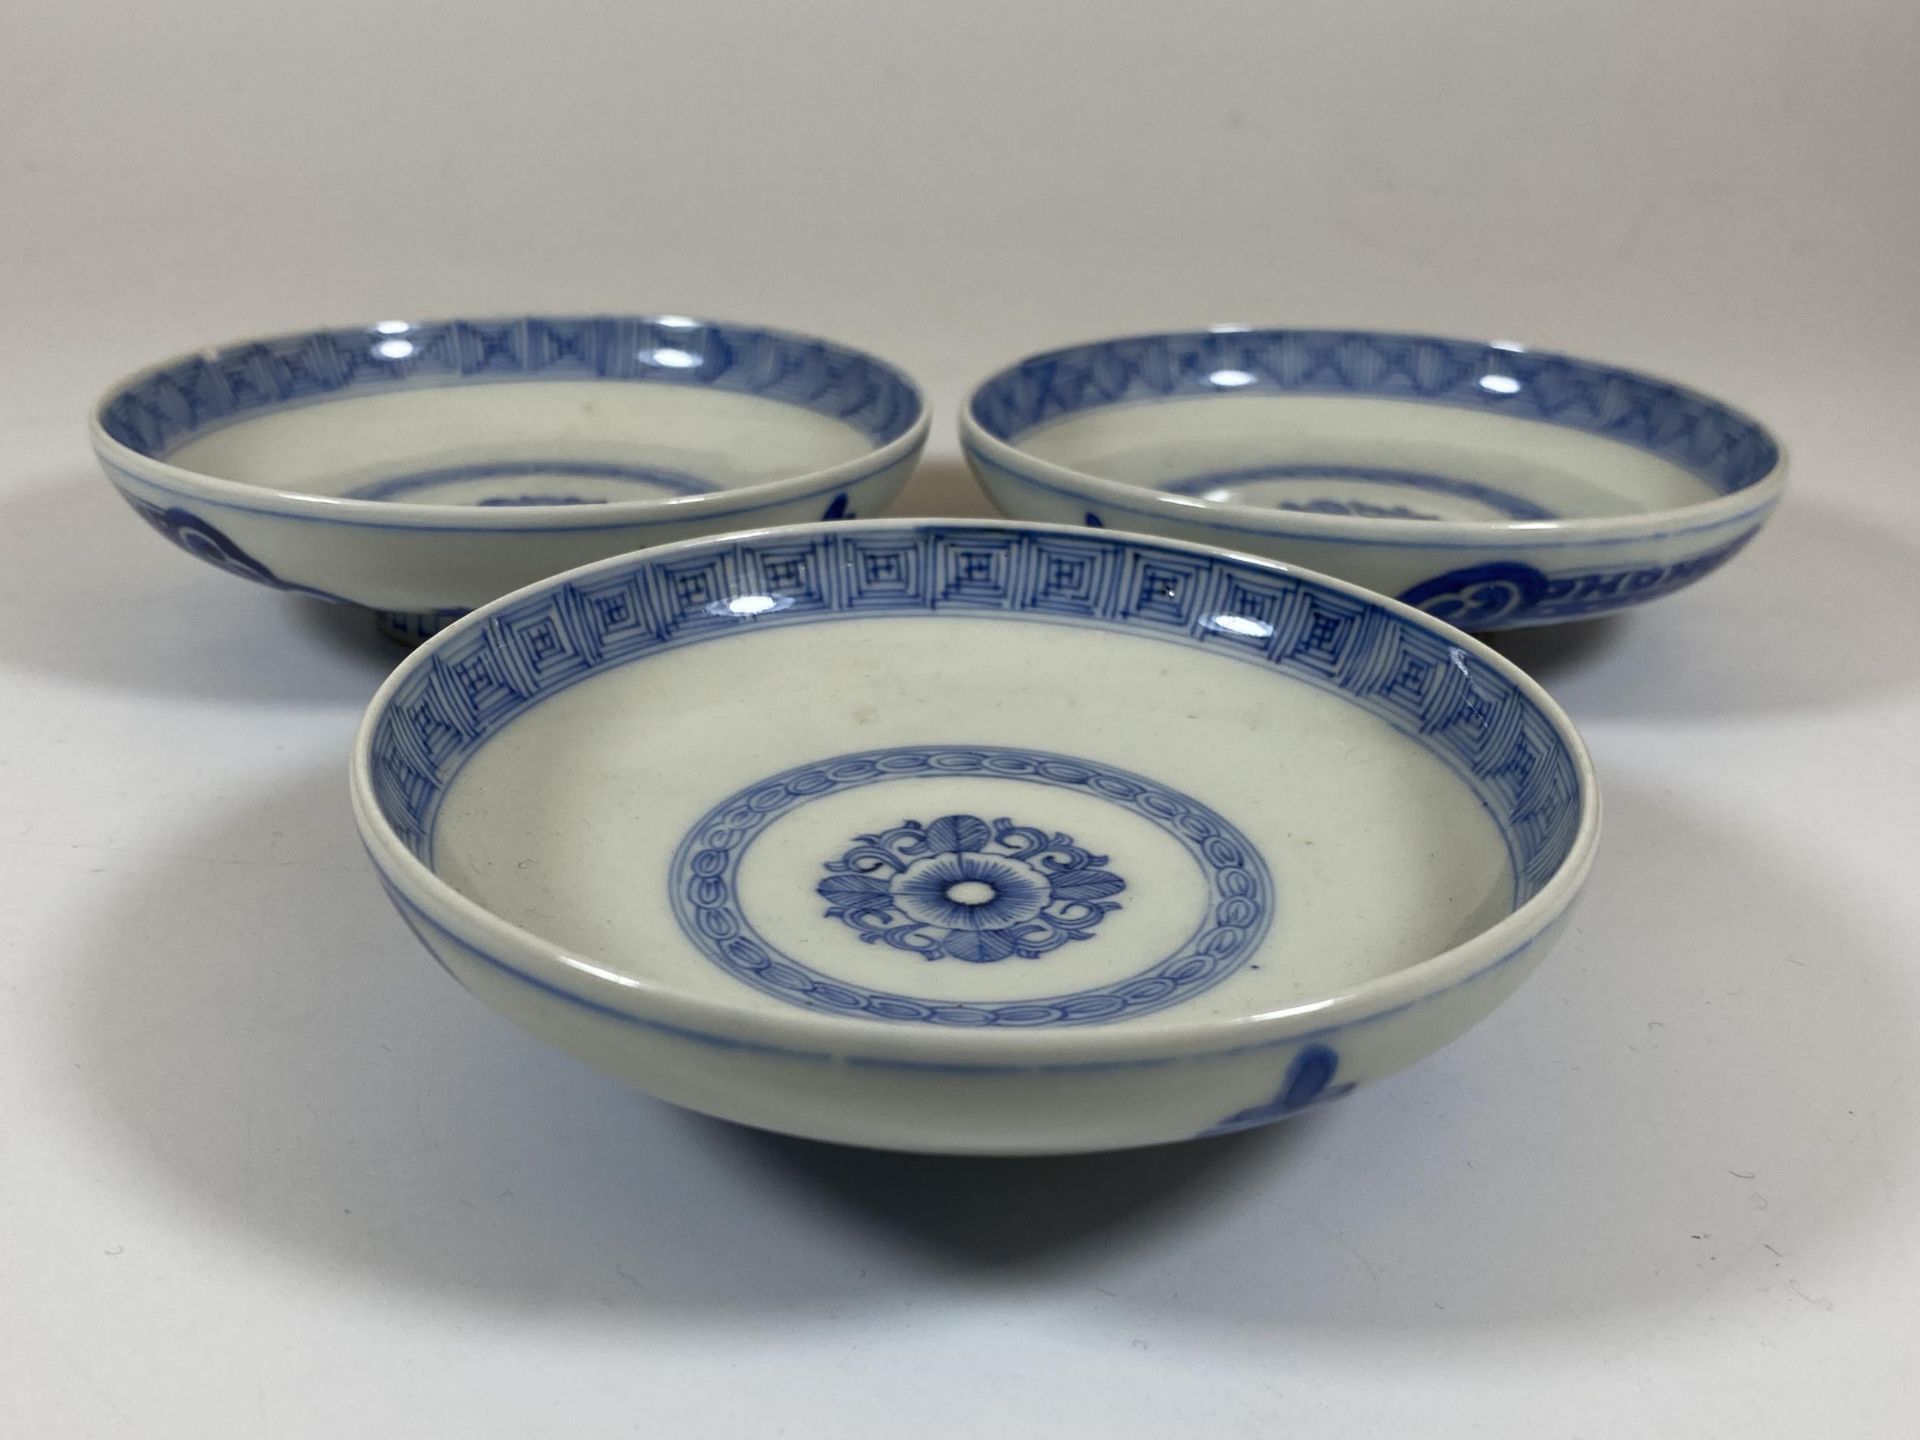 A SET OF THREE CHINESE BLUE AND WHITE PORCELAIN DISHES WITH ANIMAL AND CHARACTER DESIGNS, DIAMETER - Image 3 of 5